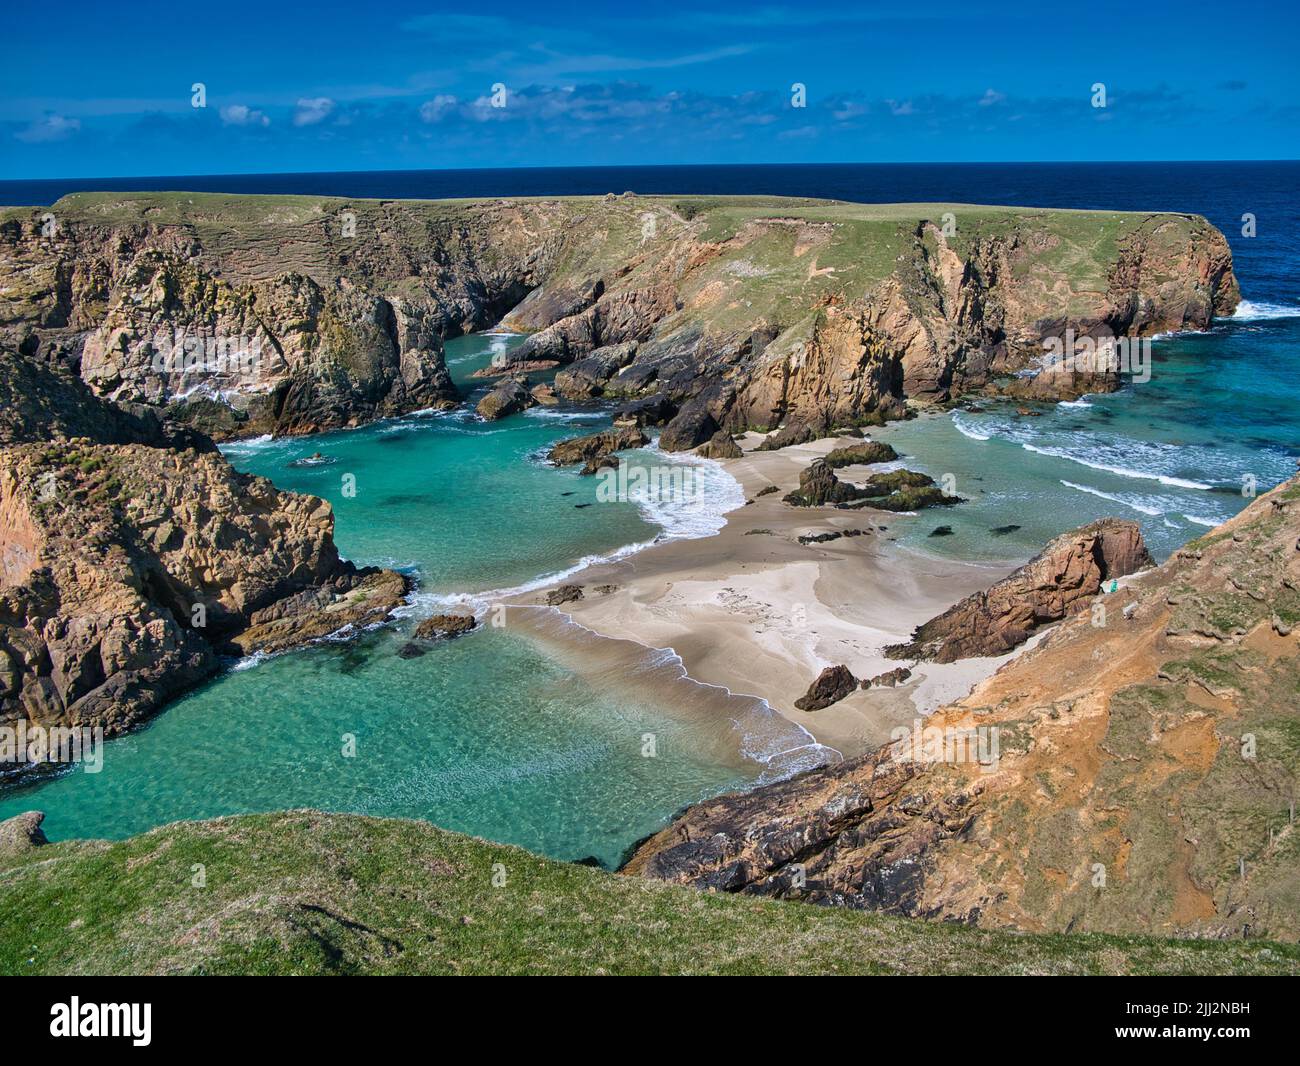 The rugged coastal cliff scenery and pristine turquoise waters around the island of Uyea in Northmavine, Shetland, UK. Taken on a sunny day. Stock Photo